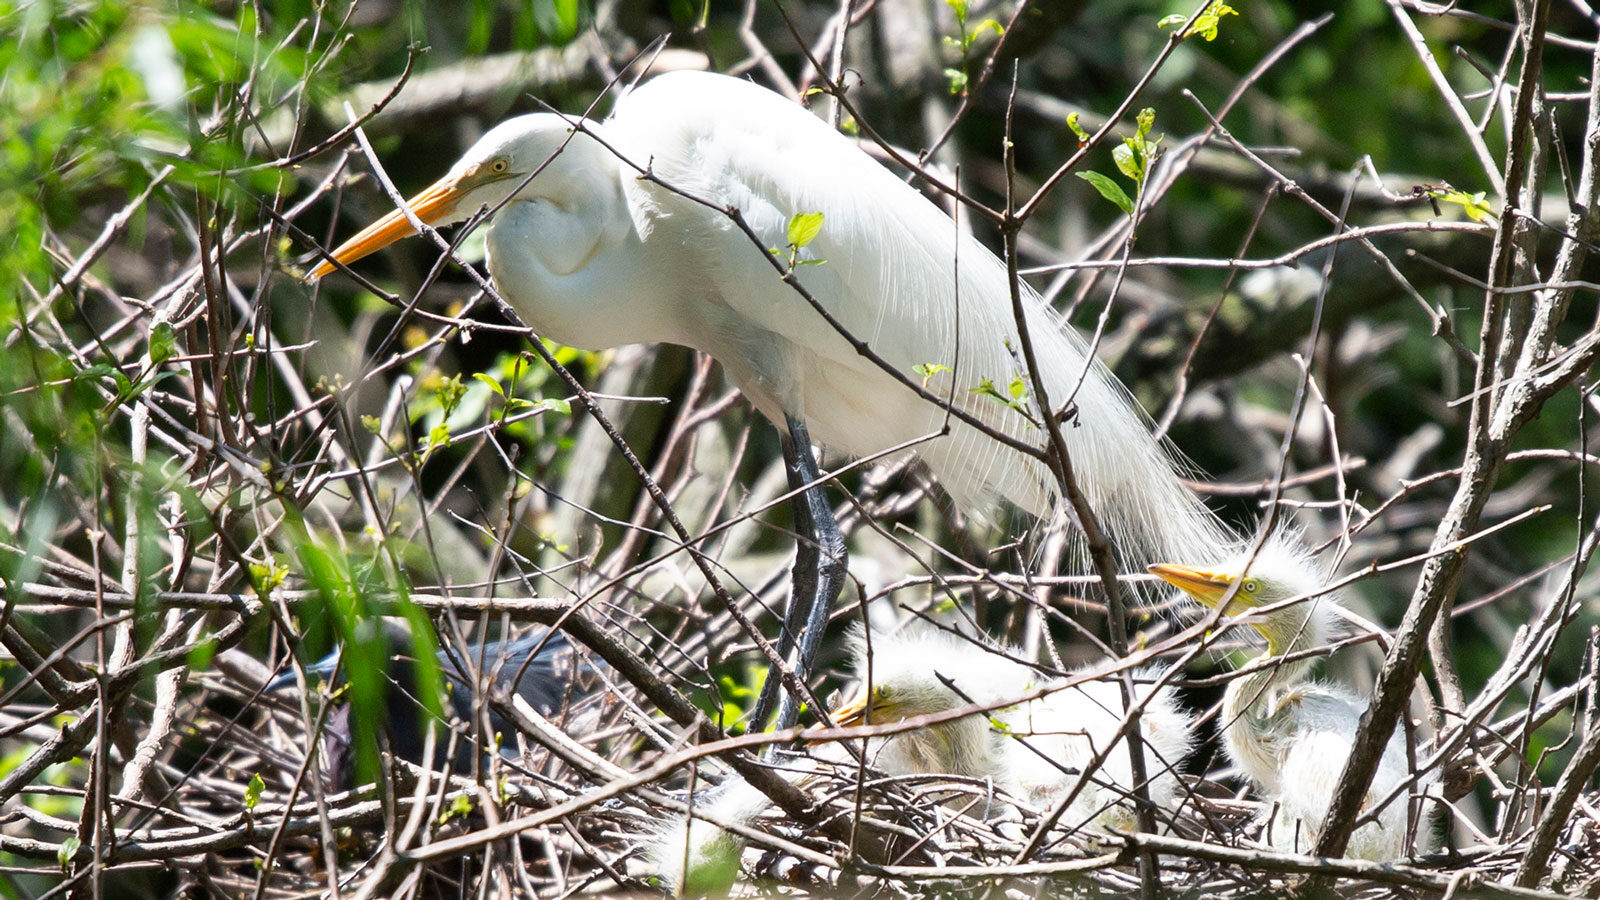 Great egret guarding its chicks in a nest